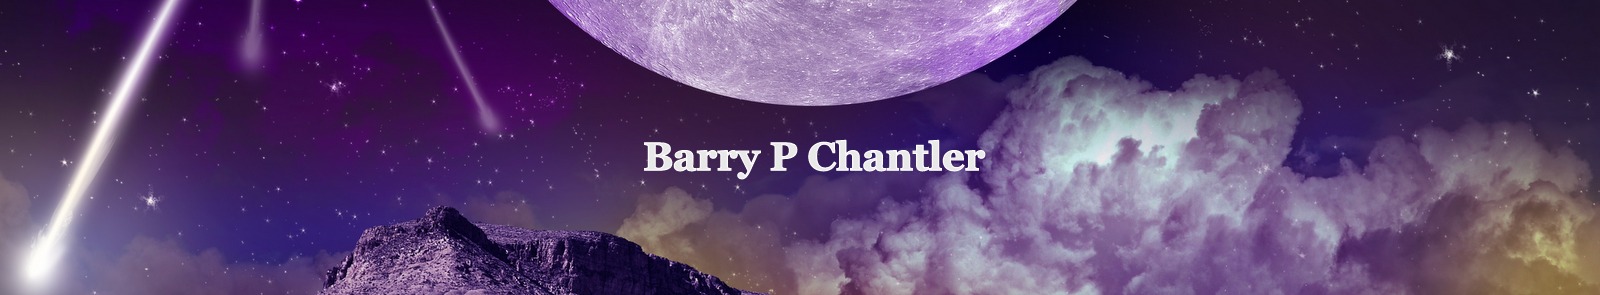 A Tear in The Fabric, Barry P Chantler